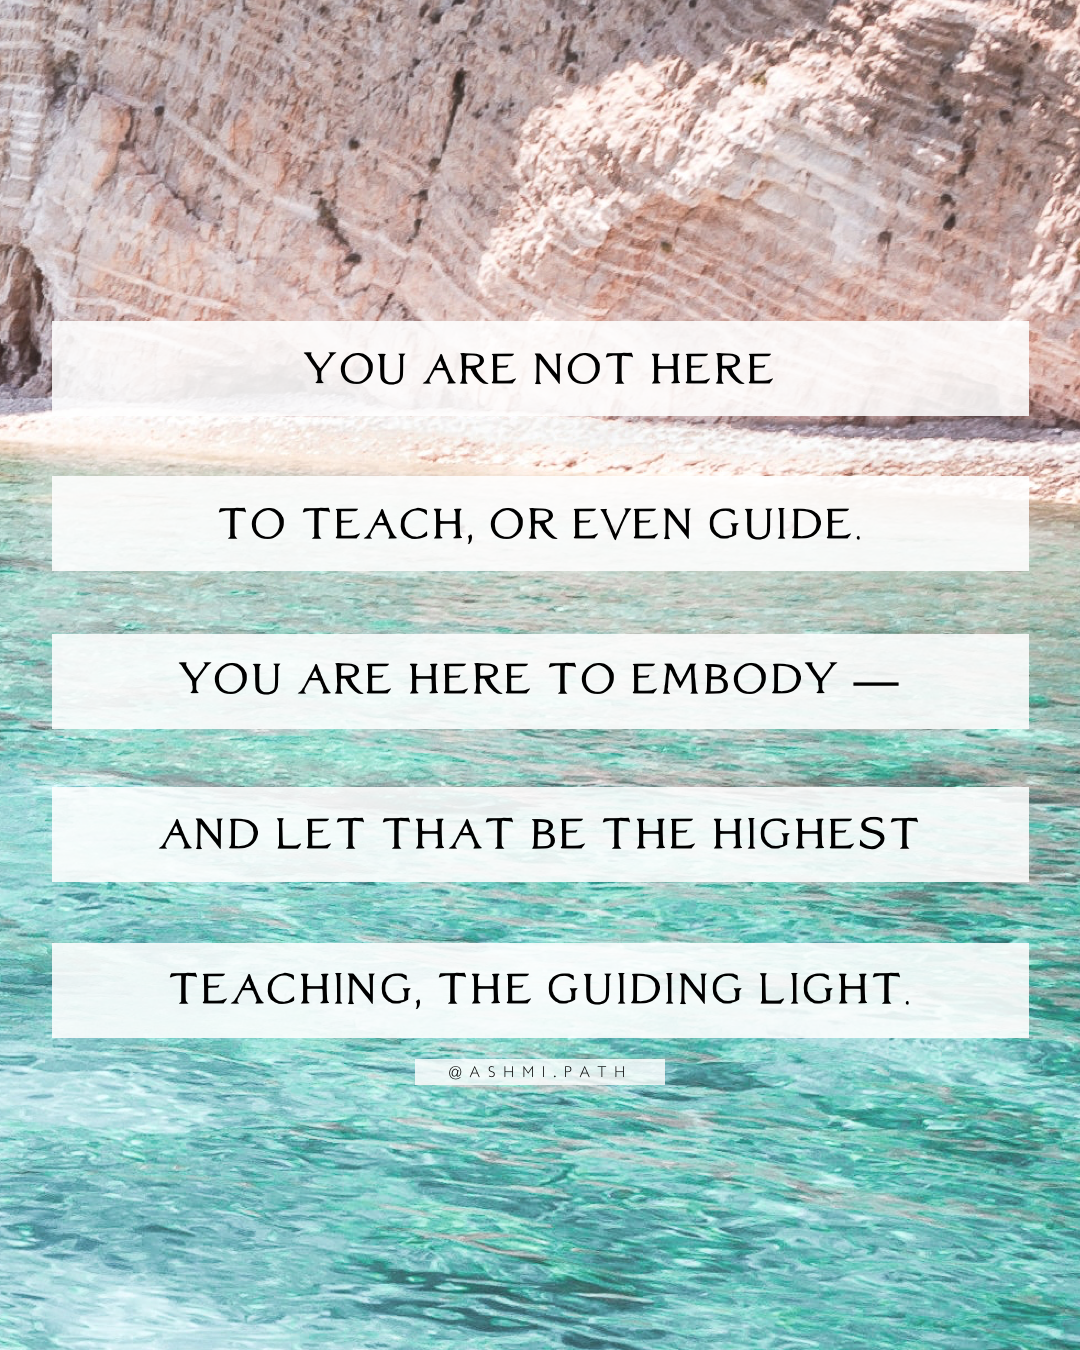 You Are Not Here to Teach or Guide